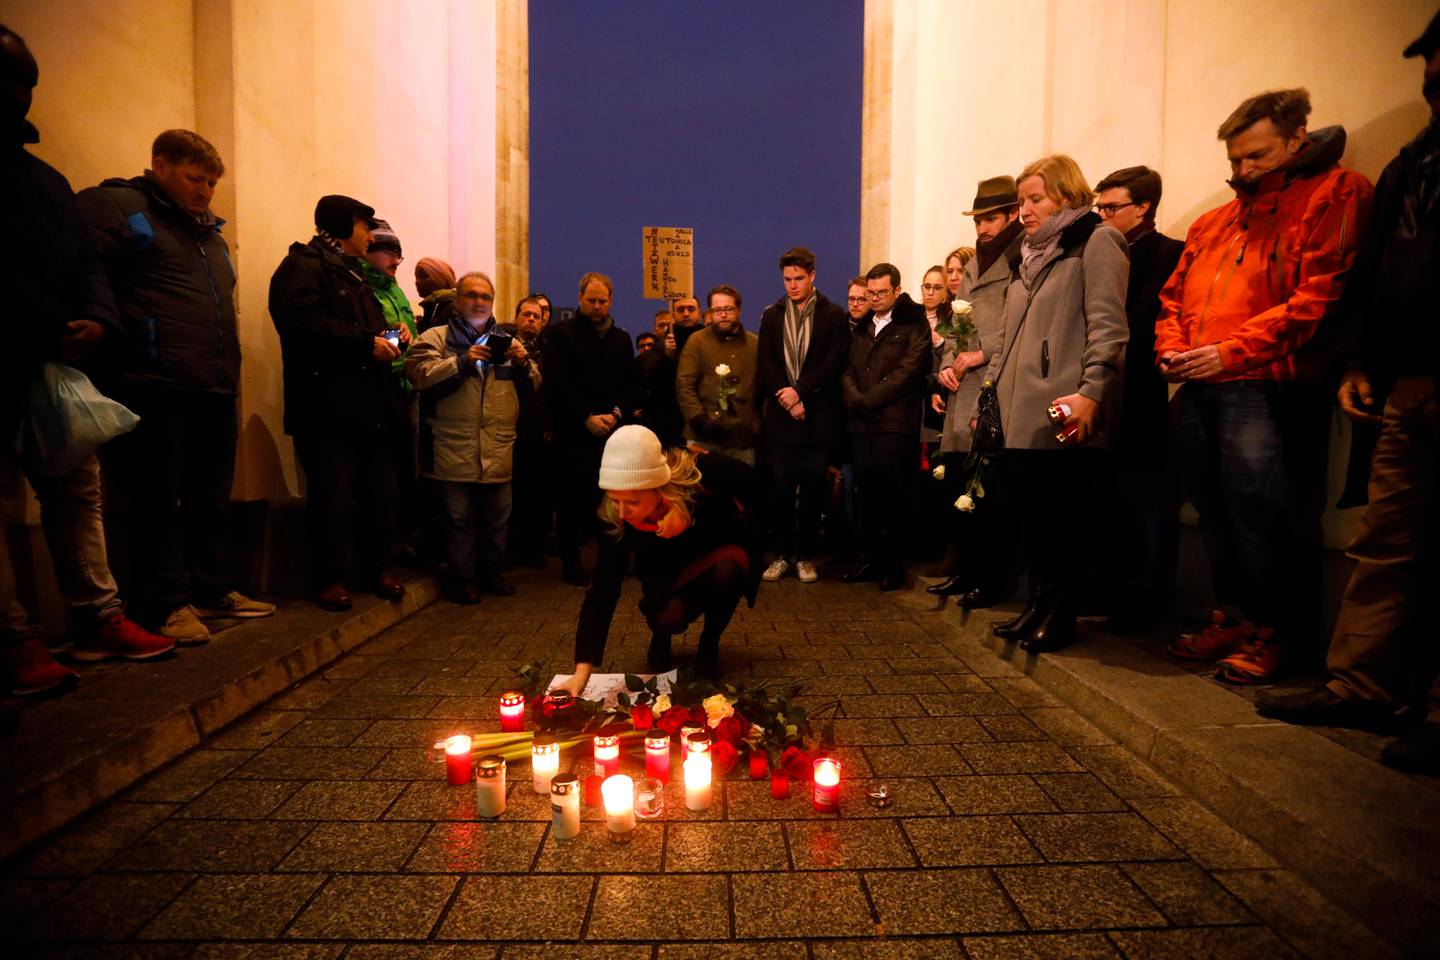 A woman lays down a candle during a vigil for victims of last night's shooting in the central German town Hanau, in front of the Brandenburg Gate in Berlin, Germany, Thursday, Feb. 20, 2020. A 43-year-old German man who posted a manifesto calling for the "complete extermination" of many "races or cultures in our midst" shot and several people of foreign background on Wednesday night, most of them Turkish, in an attack on a hookah bar and other sites in a Frankfurt suburb, authorities said Thursday. (AP Photo/Markus Schreiber)